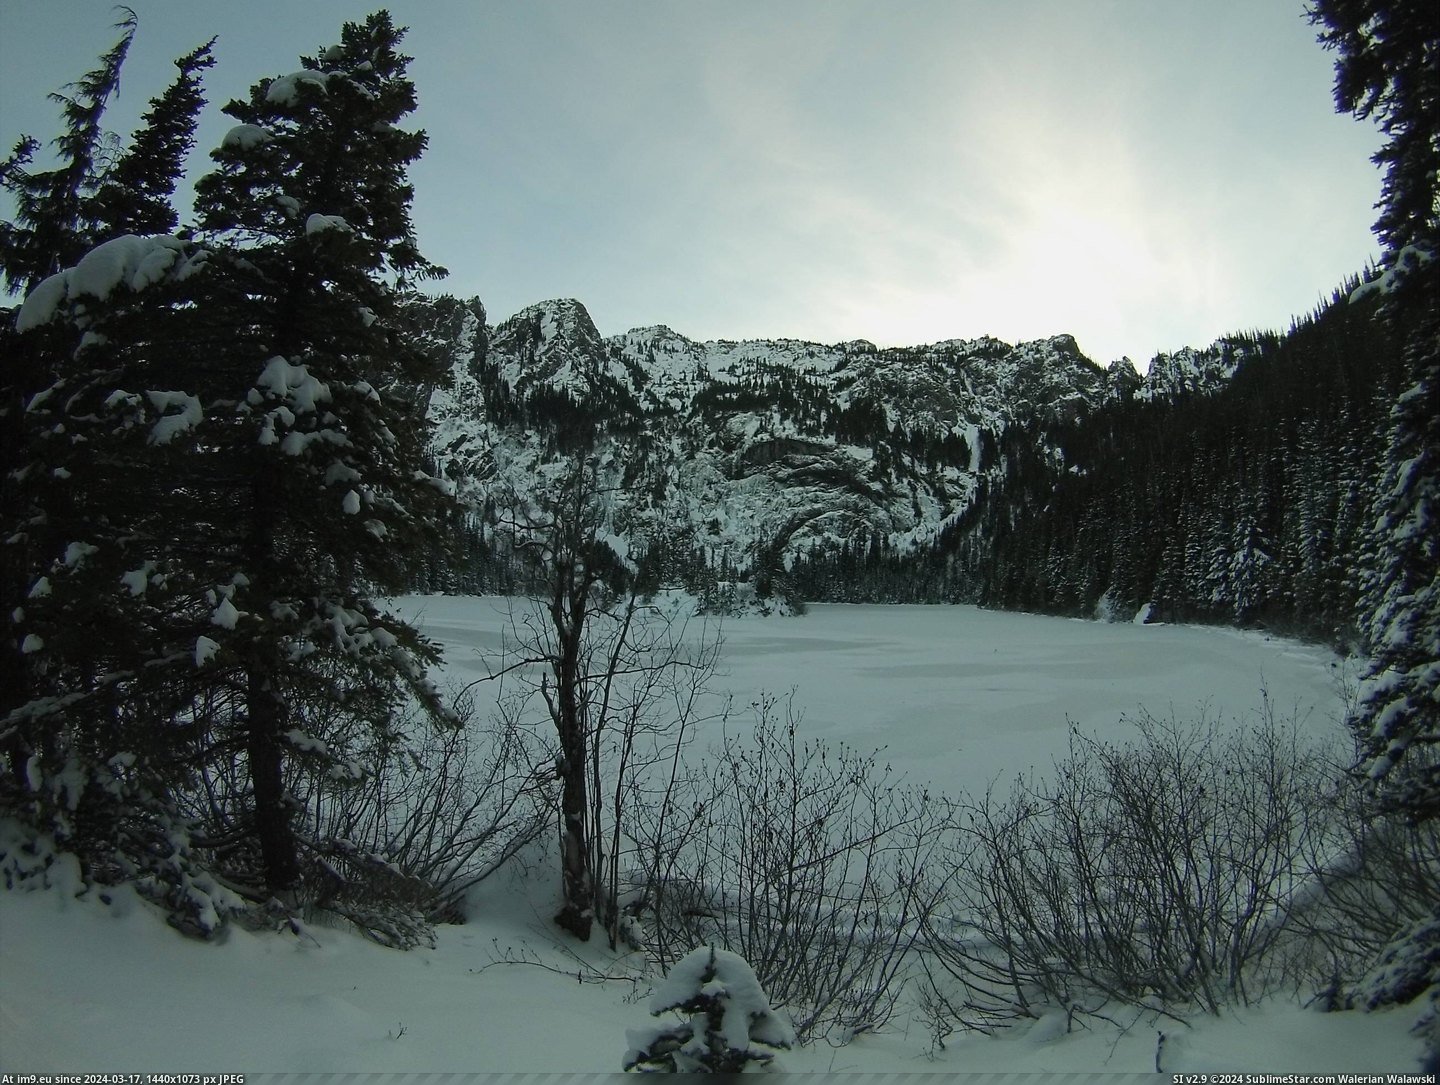 #Park #National #Angeles #2592x1944 #Olympic #Lake #1st [Earthporn] Lake Angeles in Olympic National Park, January 1st. [2592x1944] Pic. (Image of album My r/EARTHPORN favs))